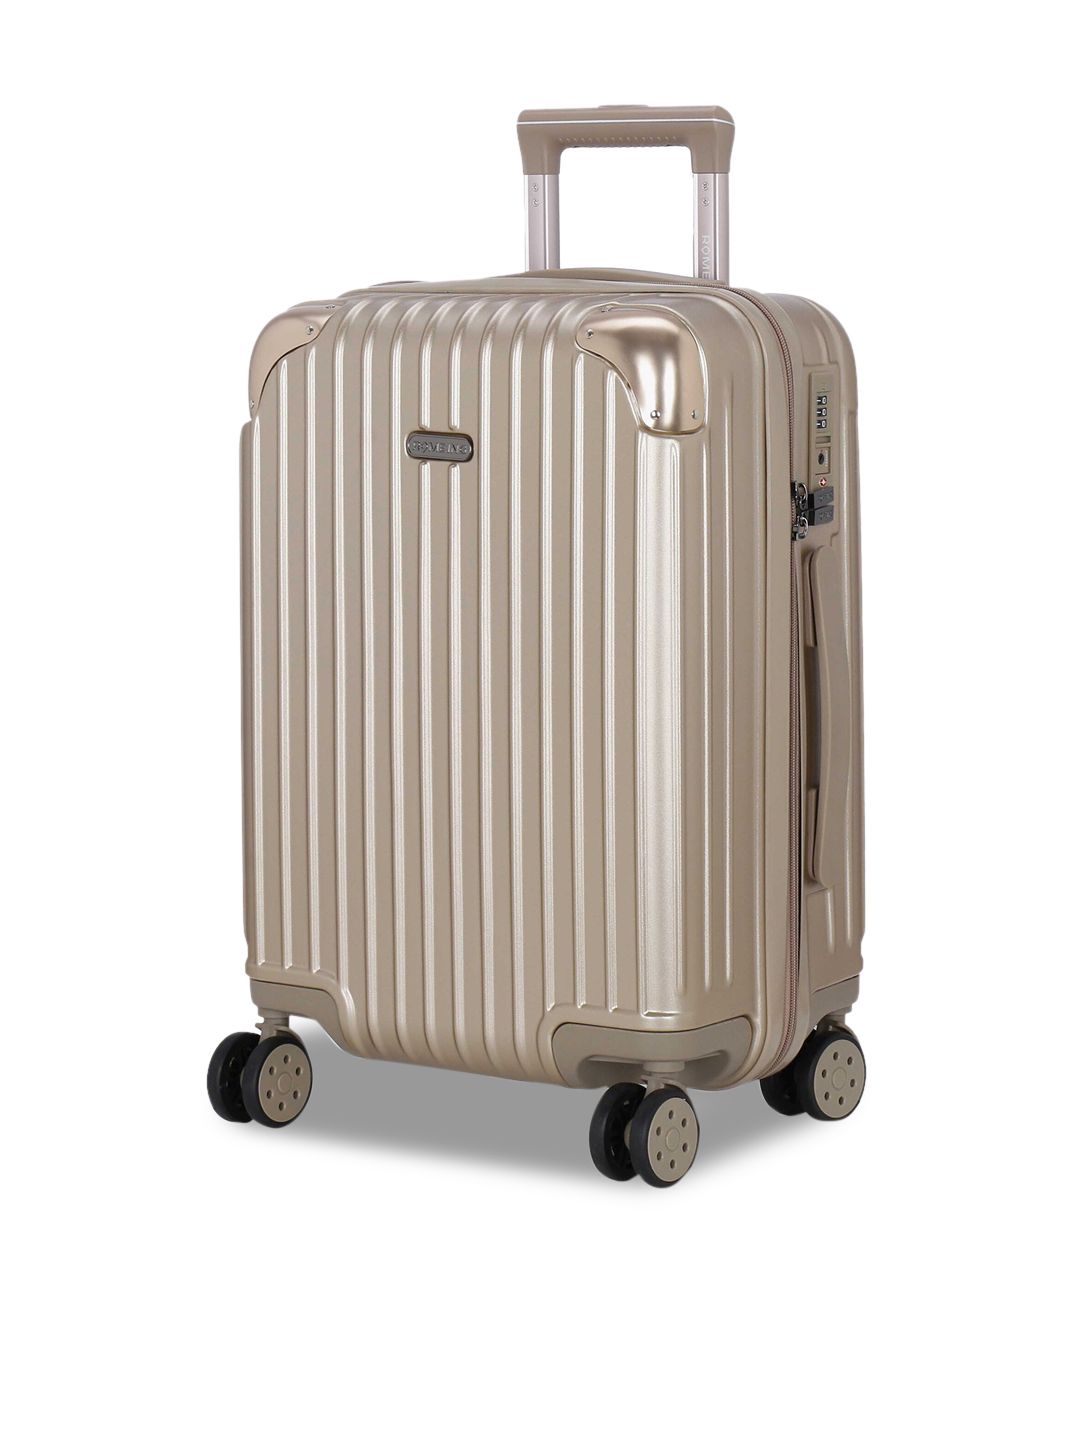 ROMEING Siena Gold-Toned Textured Hard-Sided Polycarbonate Cabin Trolley Suitcase Price in India